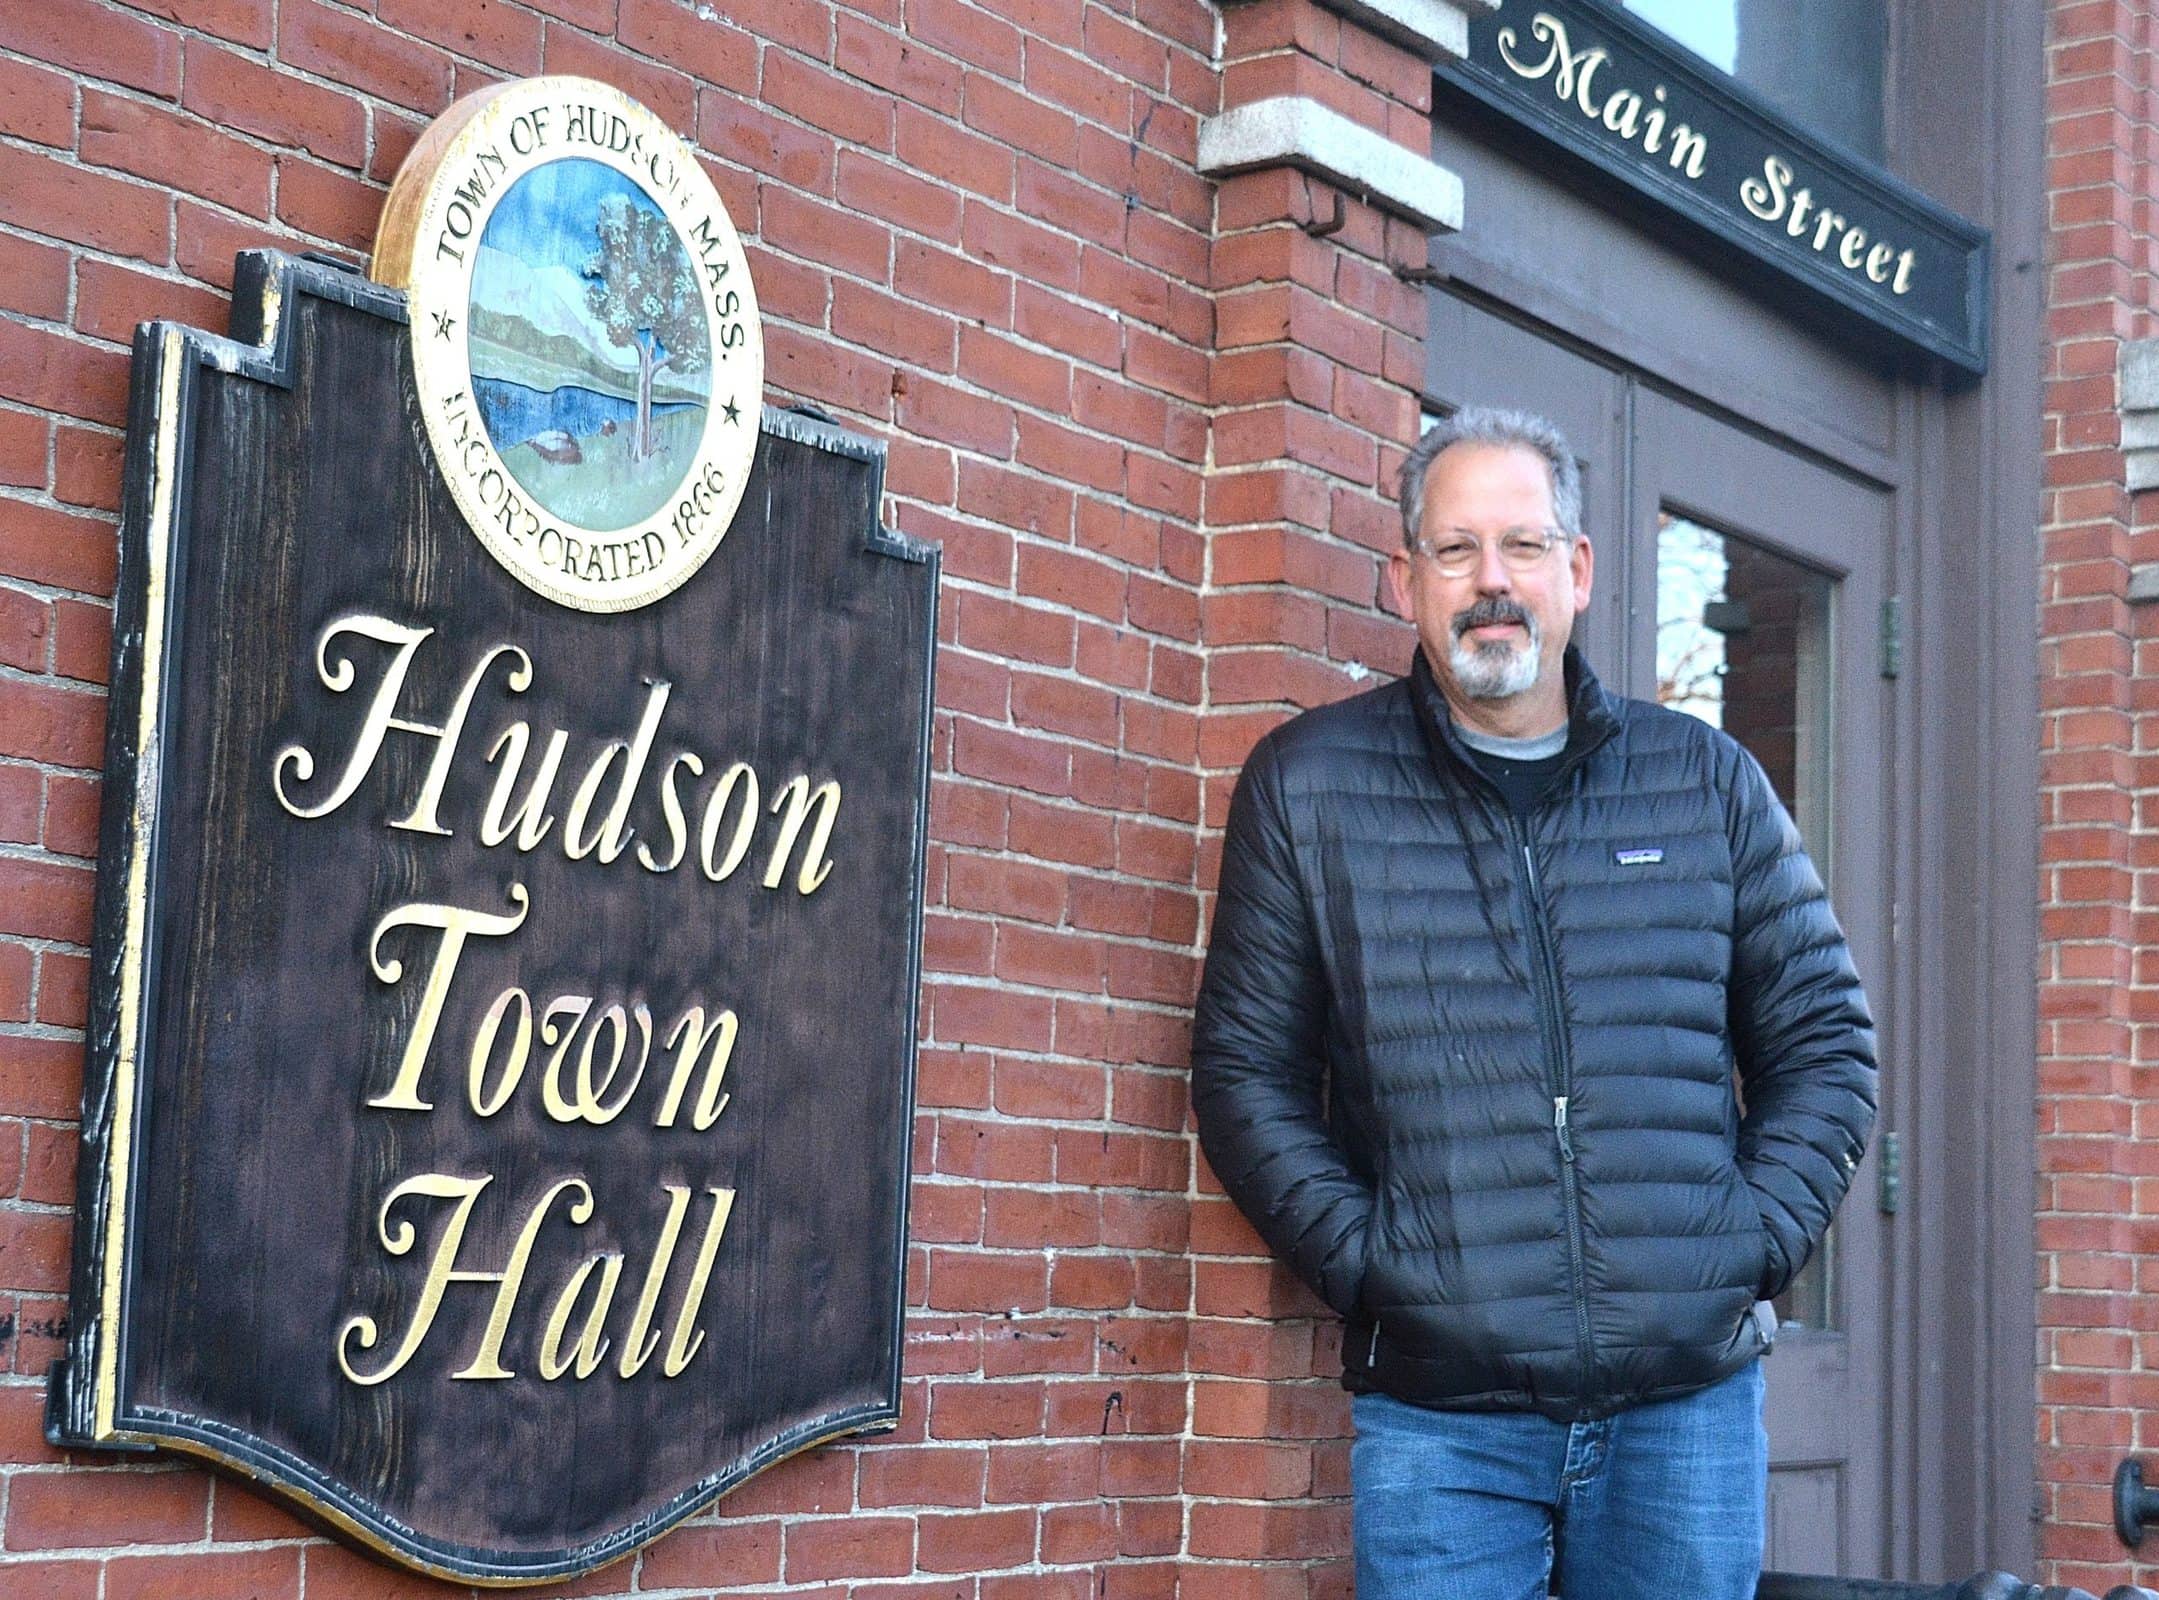 Marking 35 years of creating signage for downtown Hudson